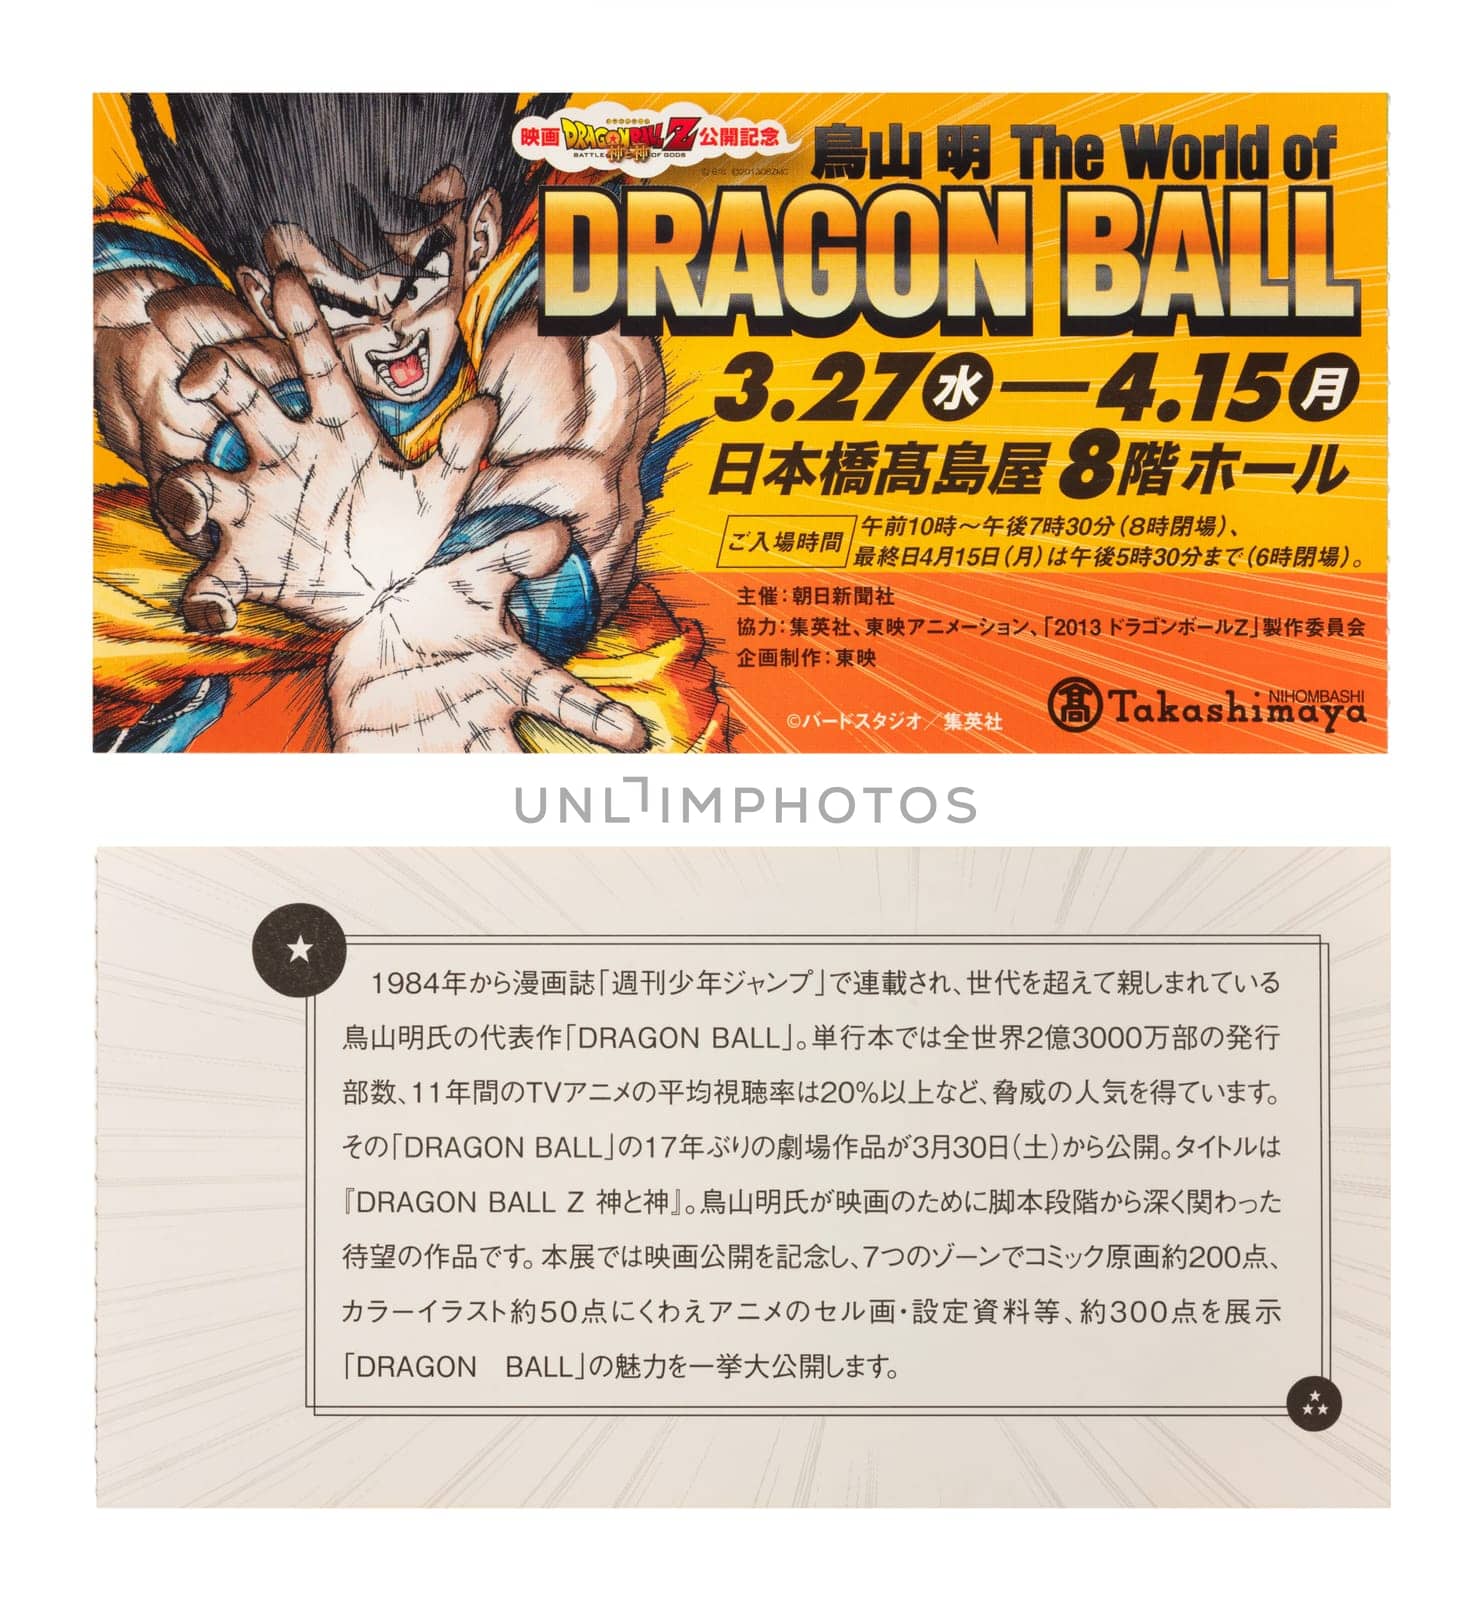 Ticket of the exhibition "Akira Toriyama The World of DRAGONBALL" held in 2013. by kuremo